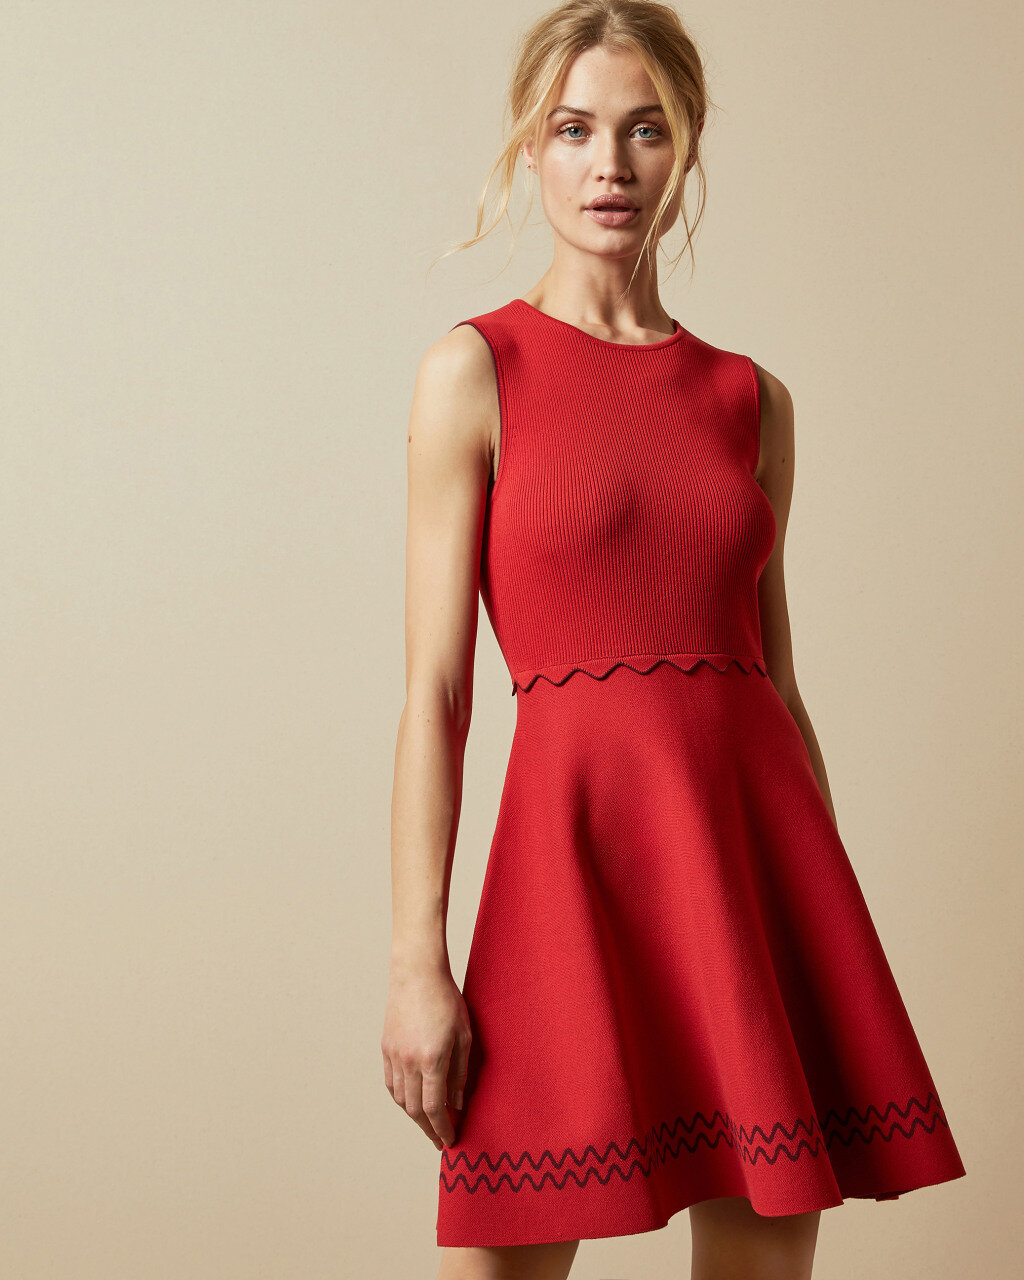 Ted Baker Dresses Top Sellers, UP TO 70% OFF | www.rupit.com